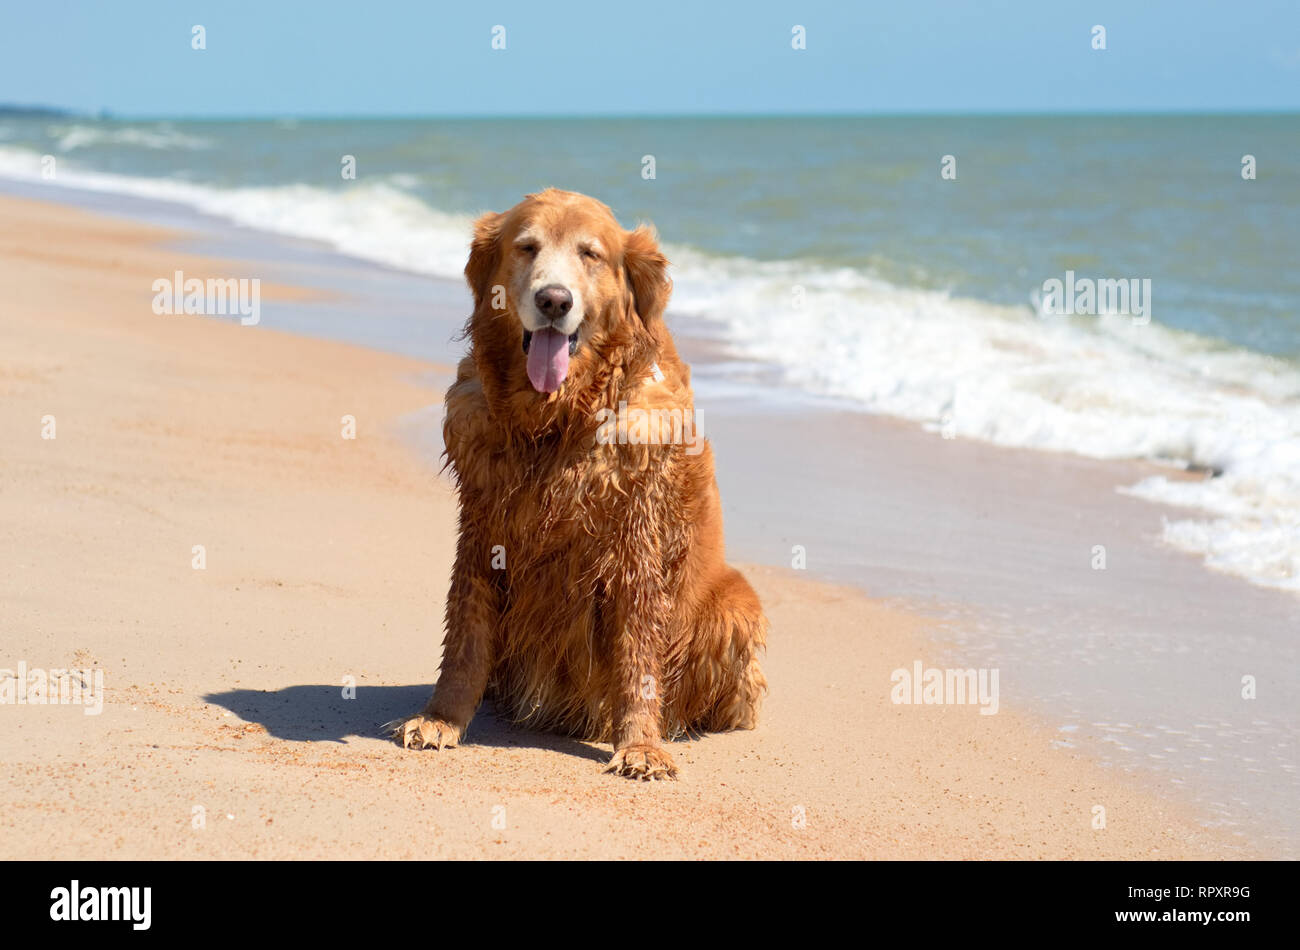 Front view close up picture of a Golden Retriever dog breed sitting on the beach and wave in summer Stock Photo